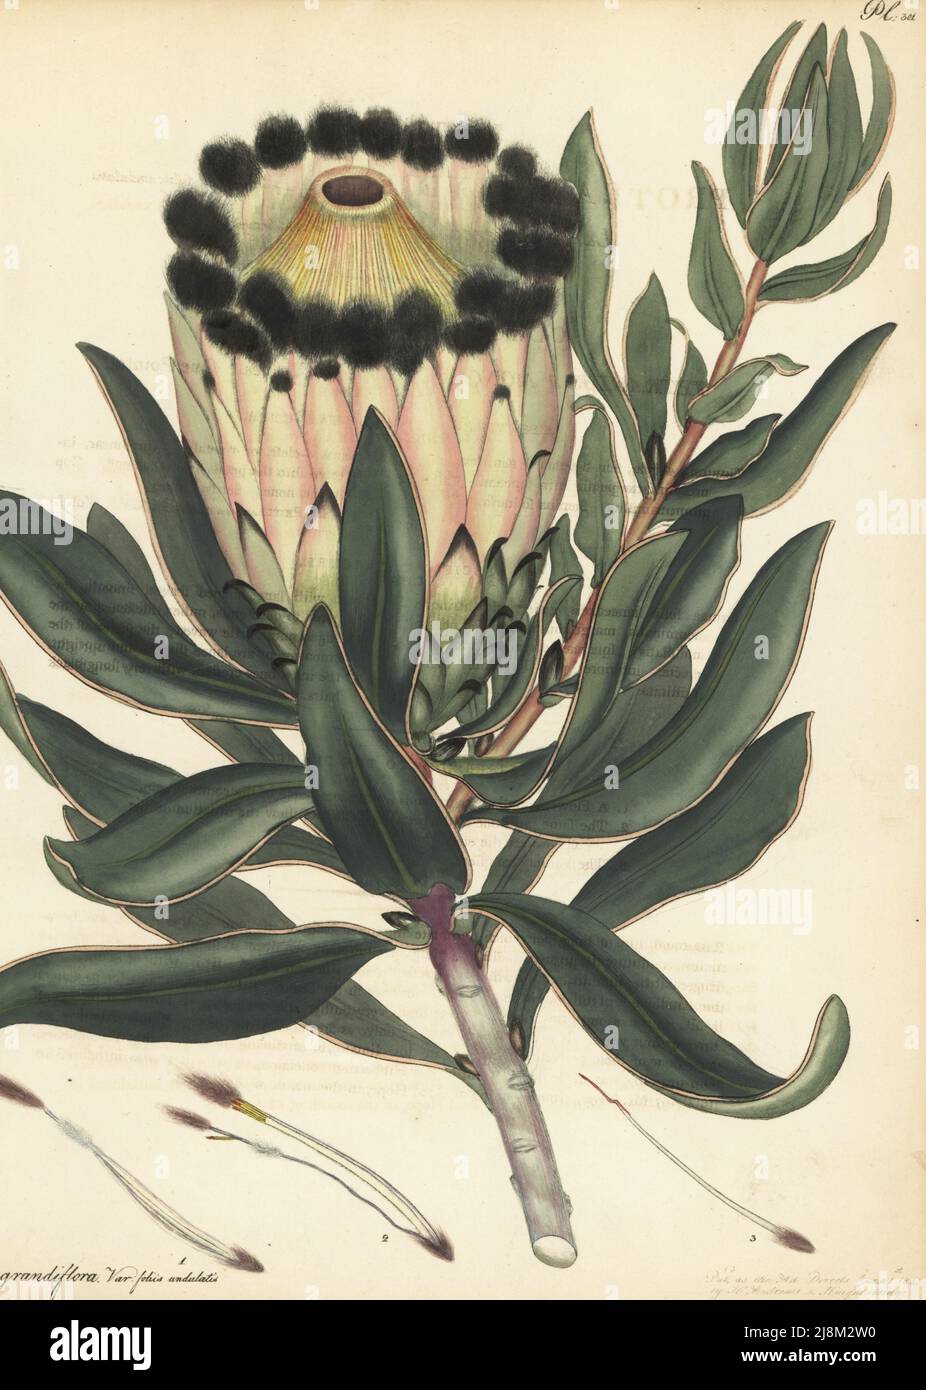 Wagon tree, waboom or blousuikerbos, Protea nitida. Large-flowered protea, waved-leaved var., Protea grandiflora var. foliis undulatis. From the Cape of Good Hope, South Africa, in the George Hibbert collection. Copperplate engraving drawn, engraved and hand-coloured by Henry Andrews from his Botanical Register, Volume 5, self-published in Knightsbridge, London, 1803. Stock Photo